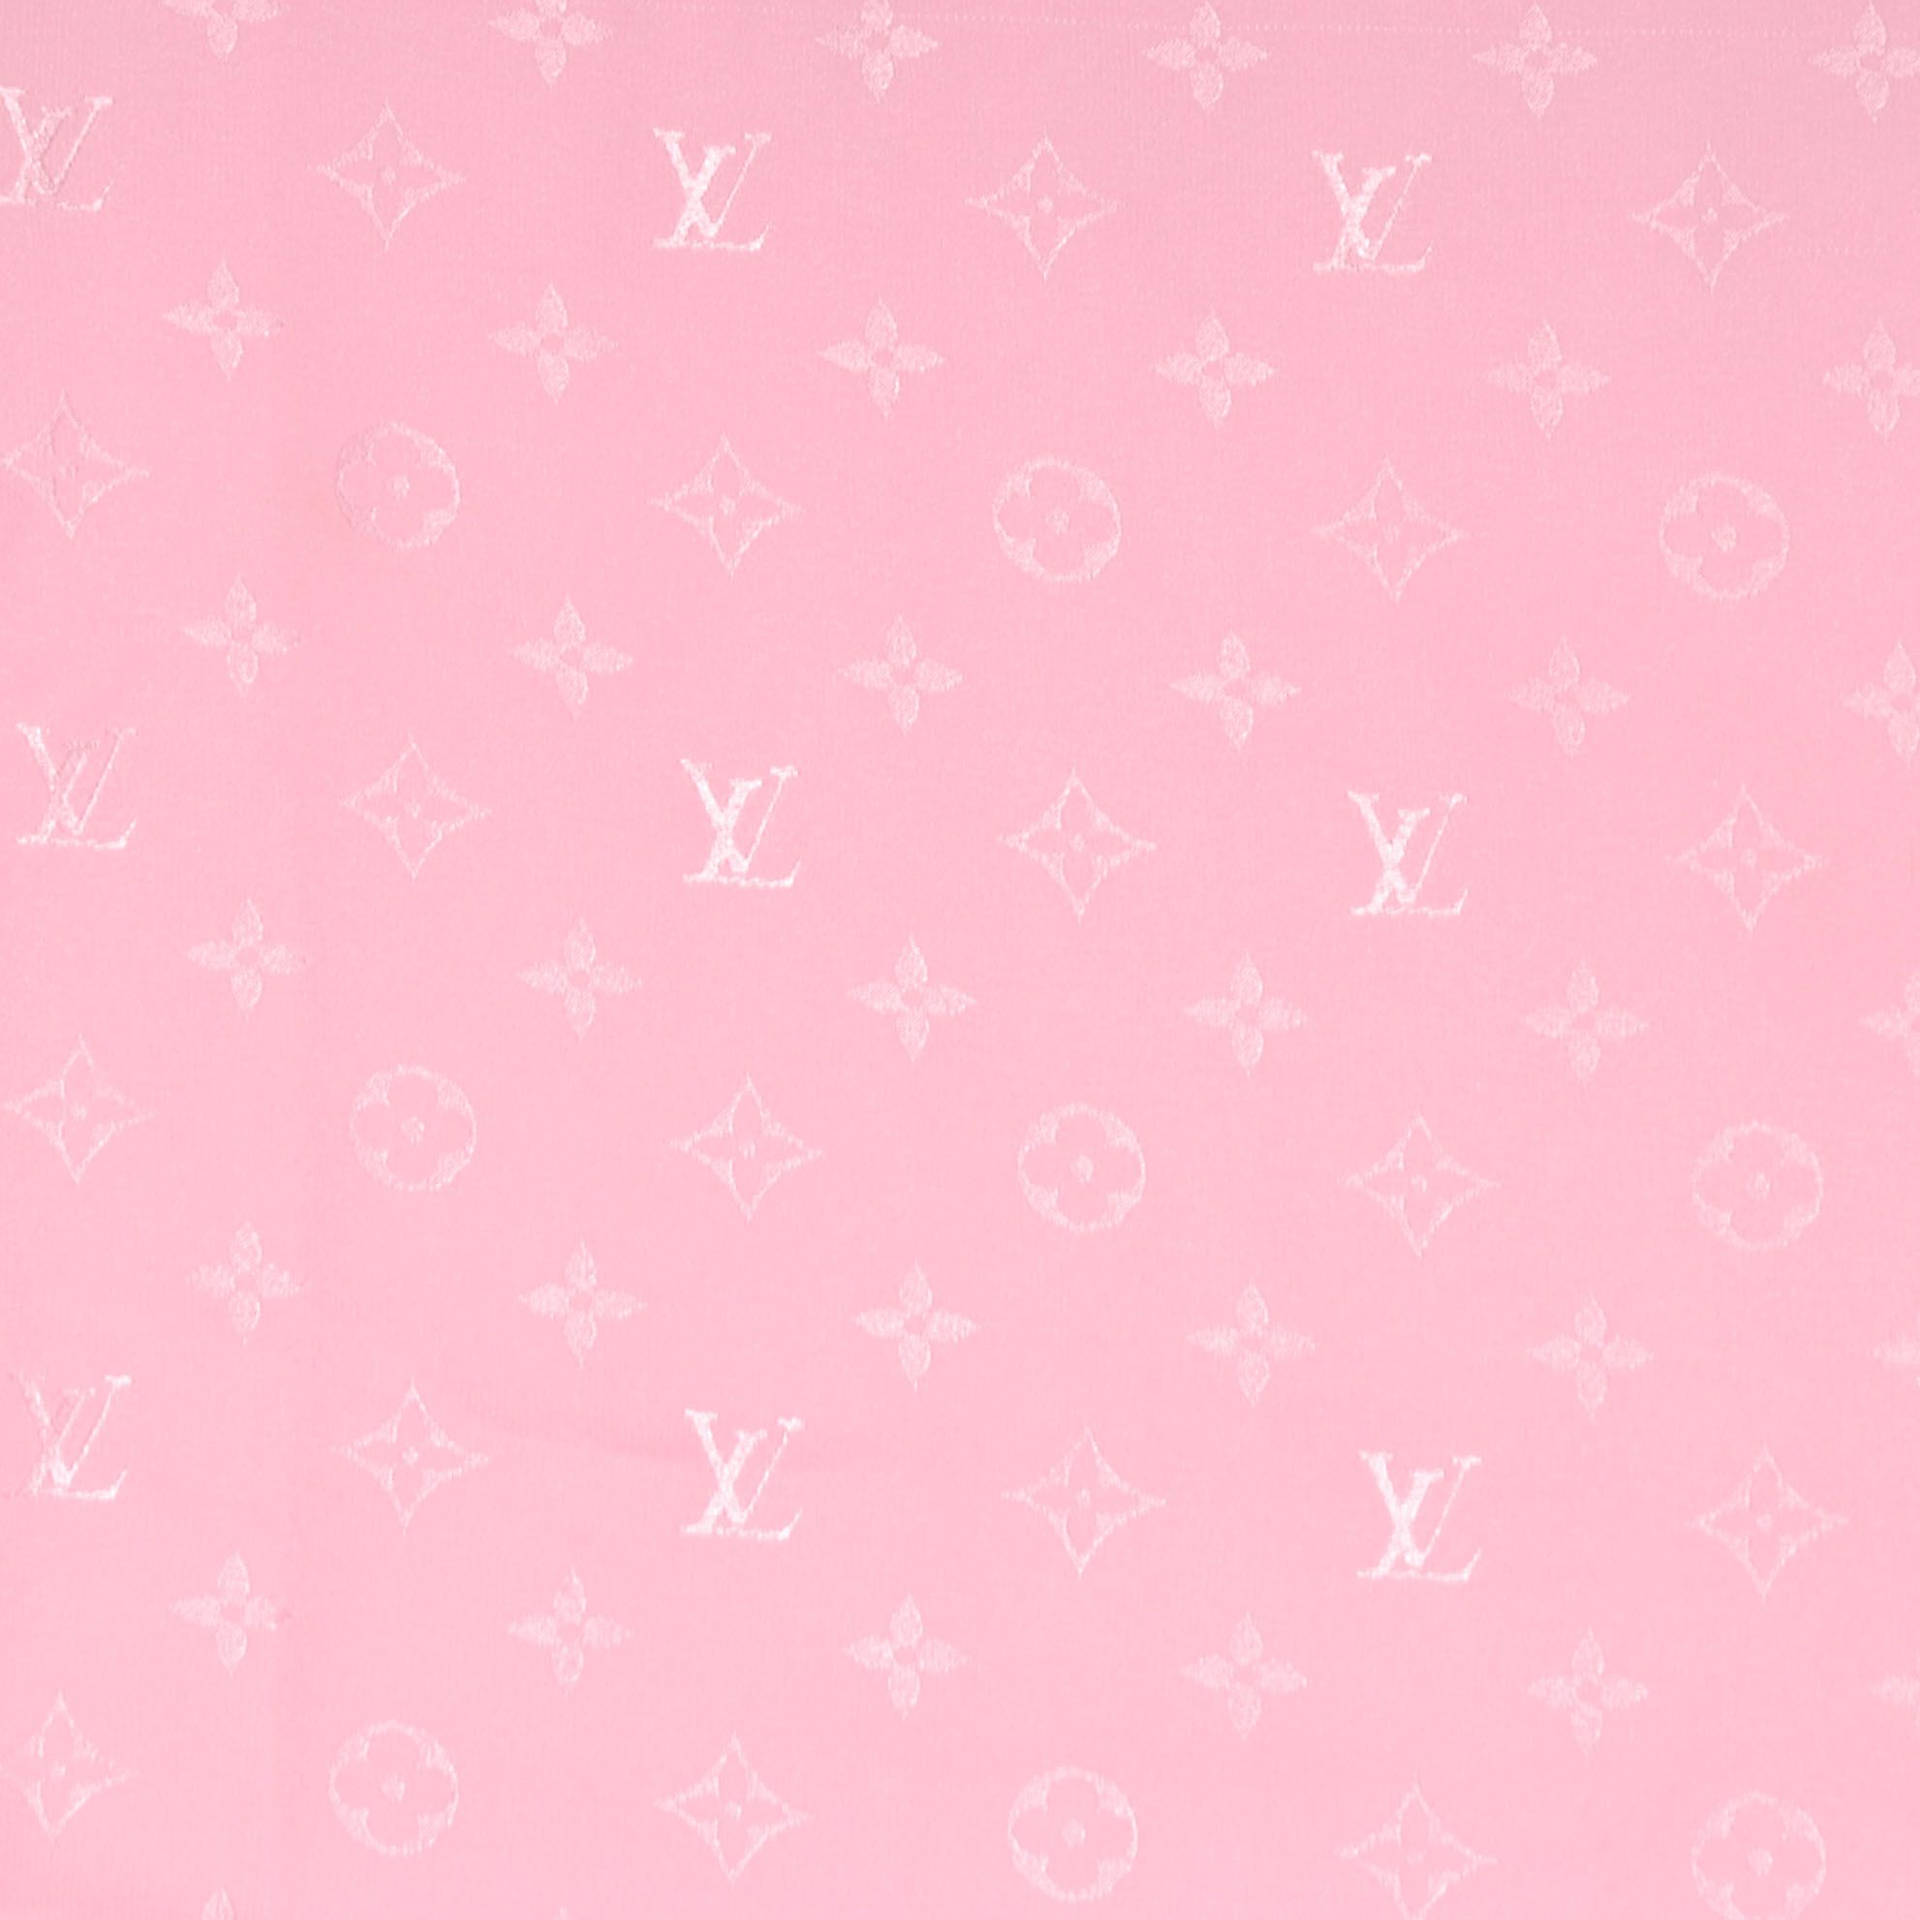 Louis Vuitton Aesthetic Pink Collage Background